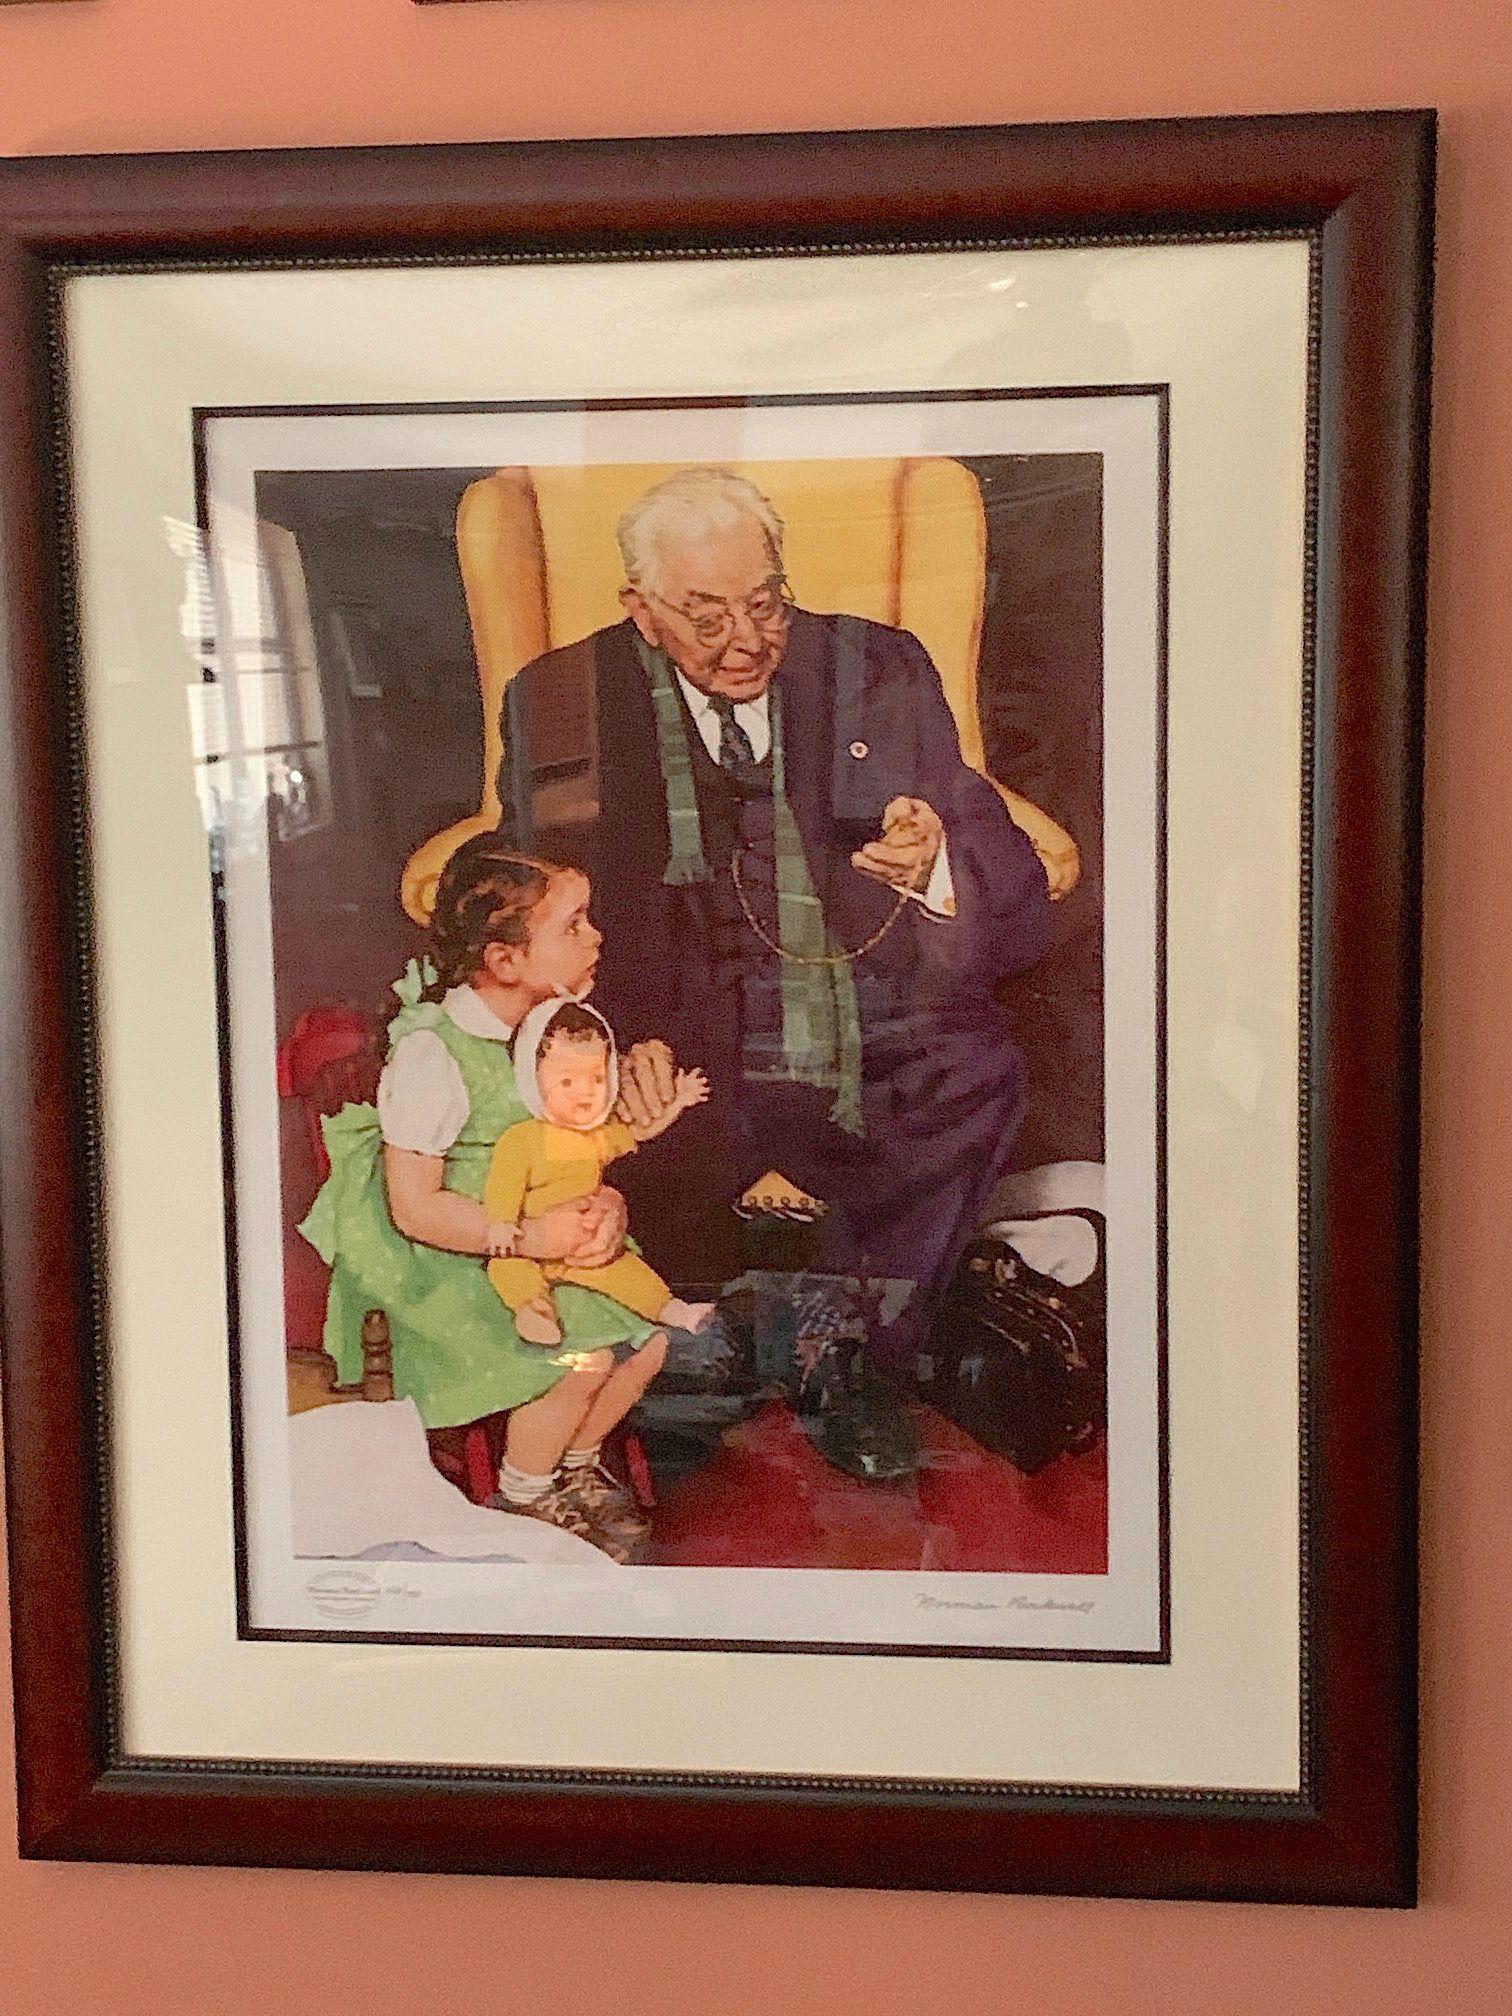 Norman Rockwell - Limited Edition Lithrograph - no. 428 of 750